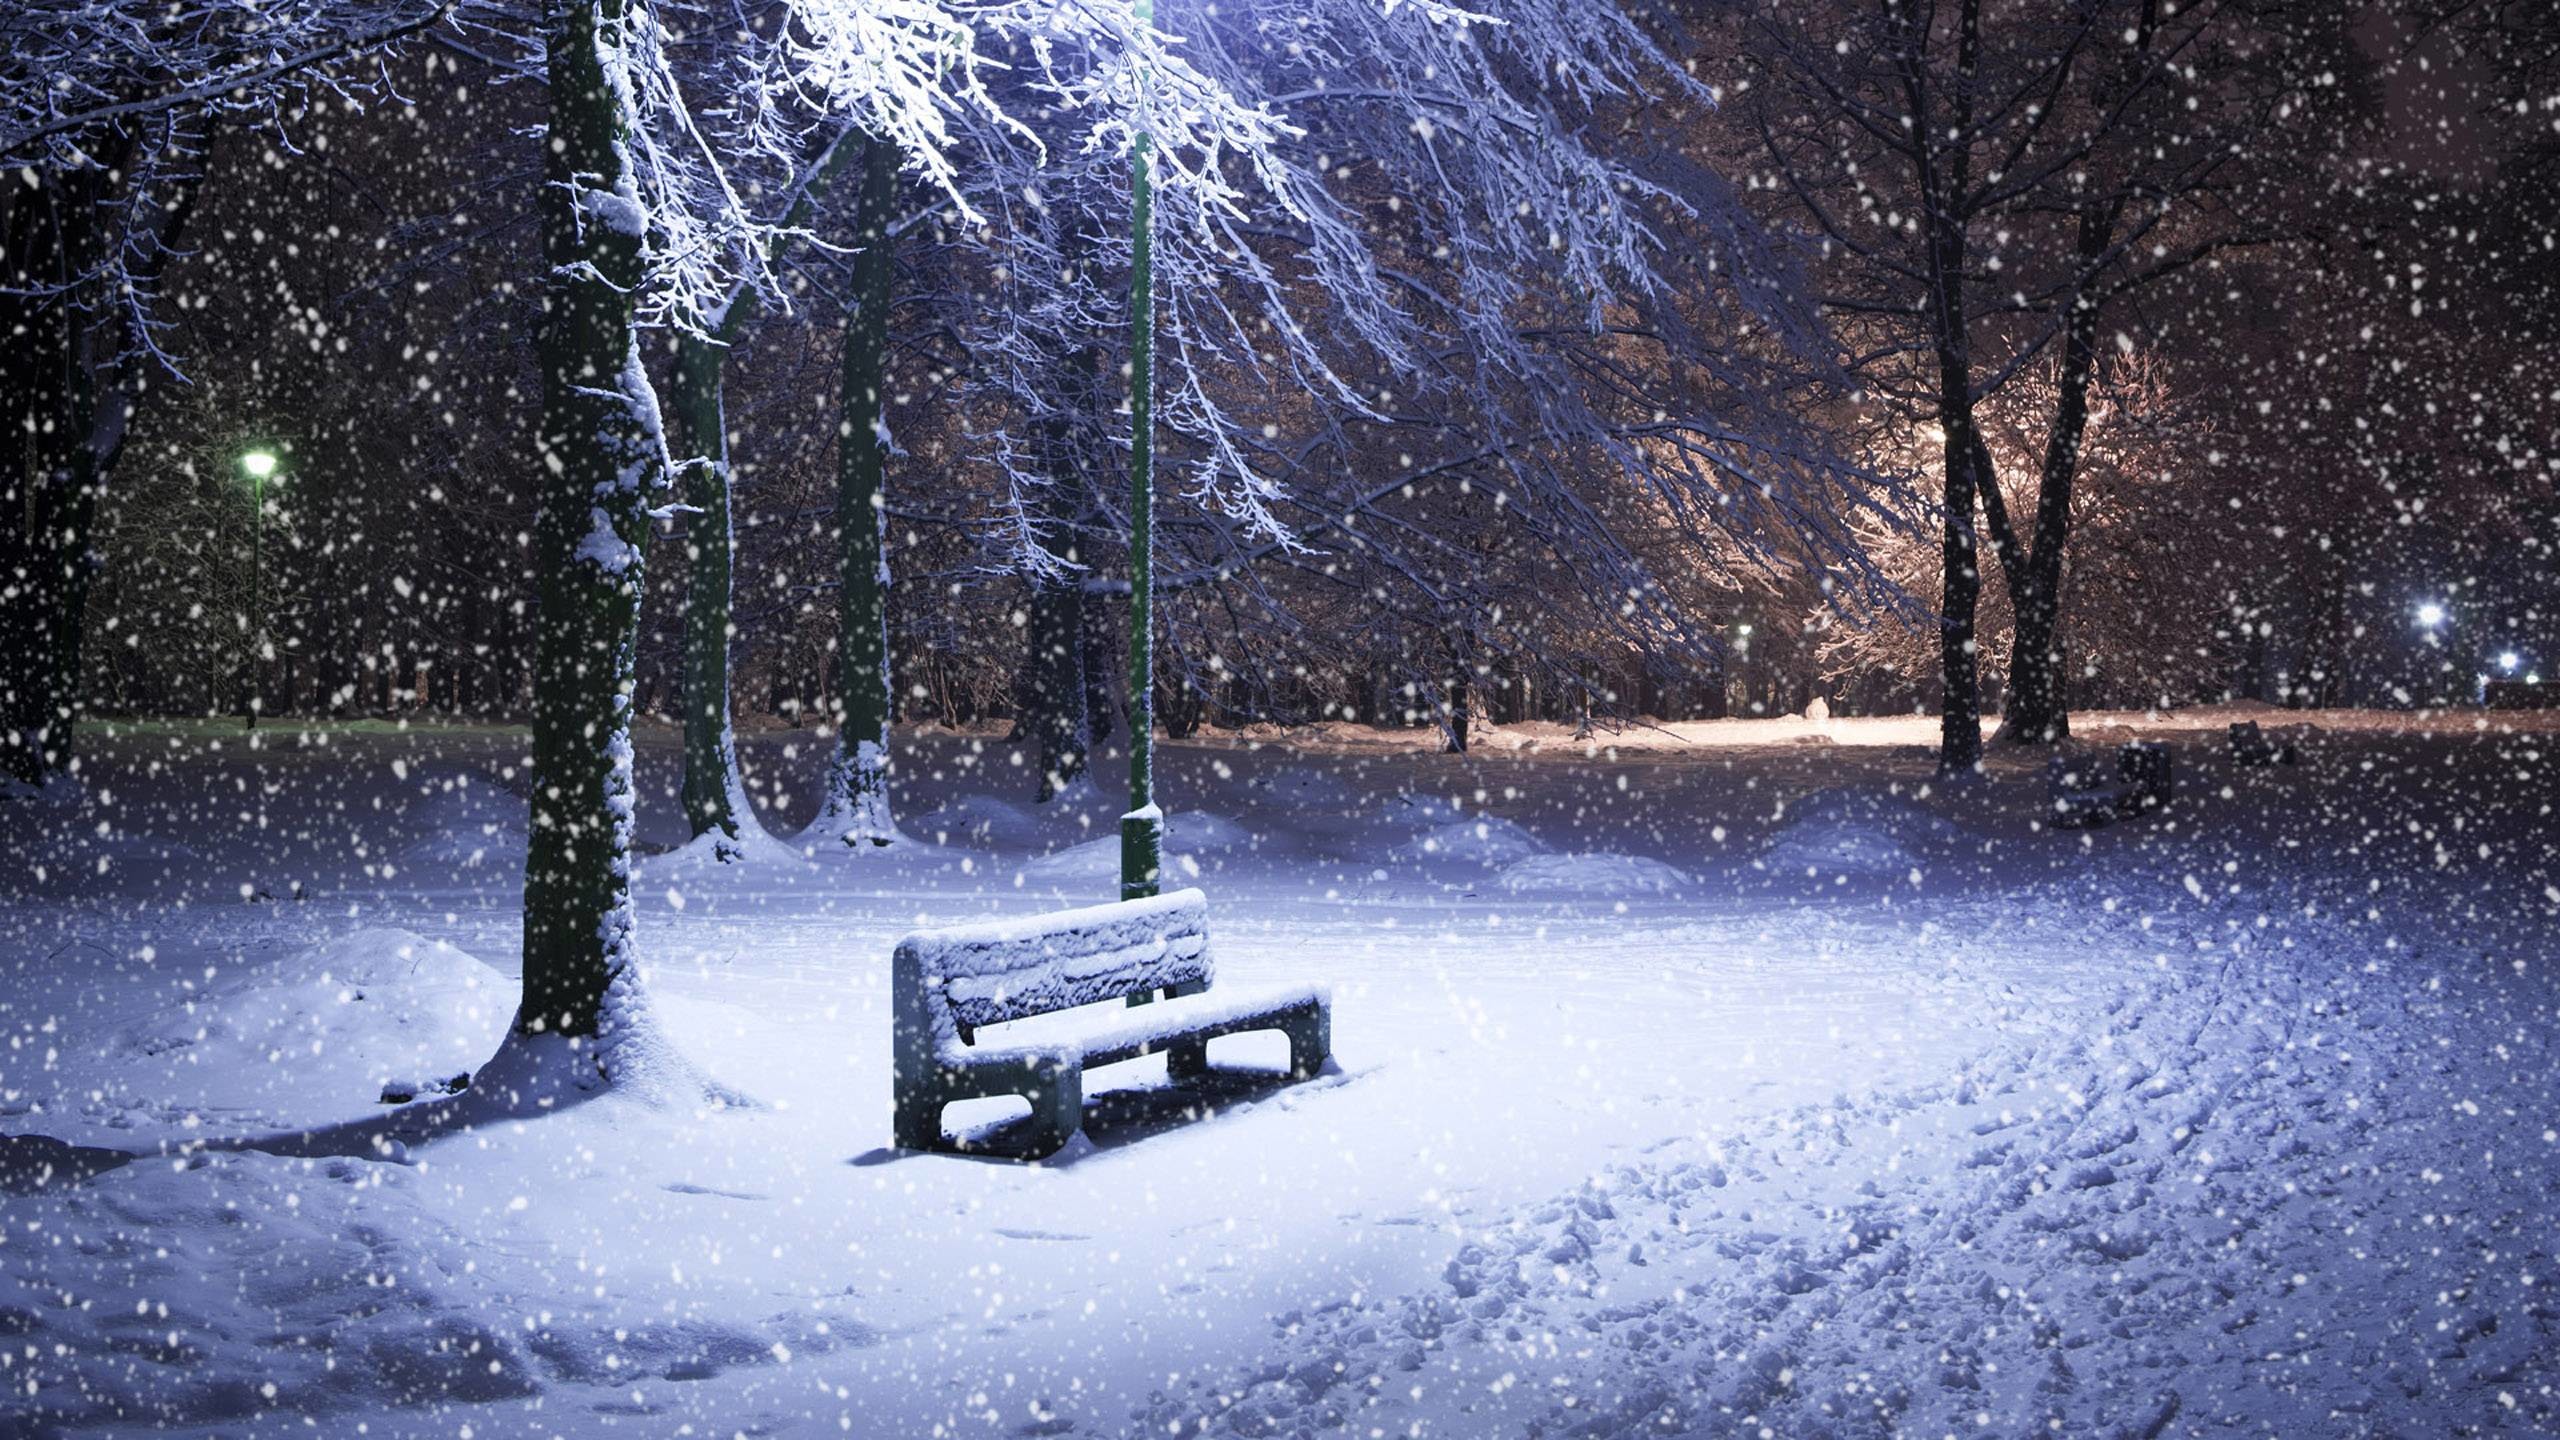 2560x1440 Winter Snow Pictures Wallpaper for PC Full HD Pictures 1680Ã1050 Winter  Wallpapers For PC